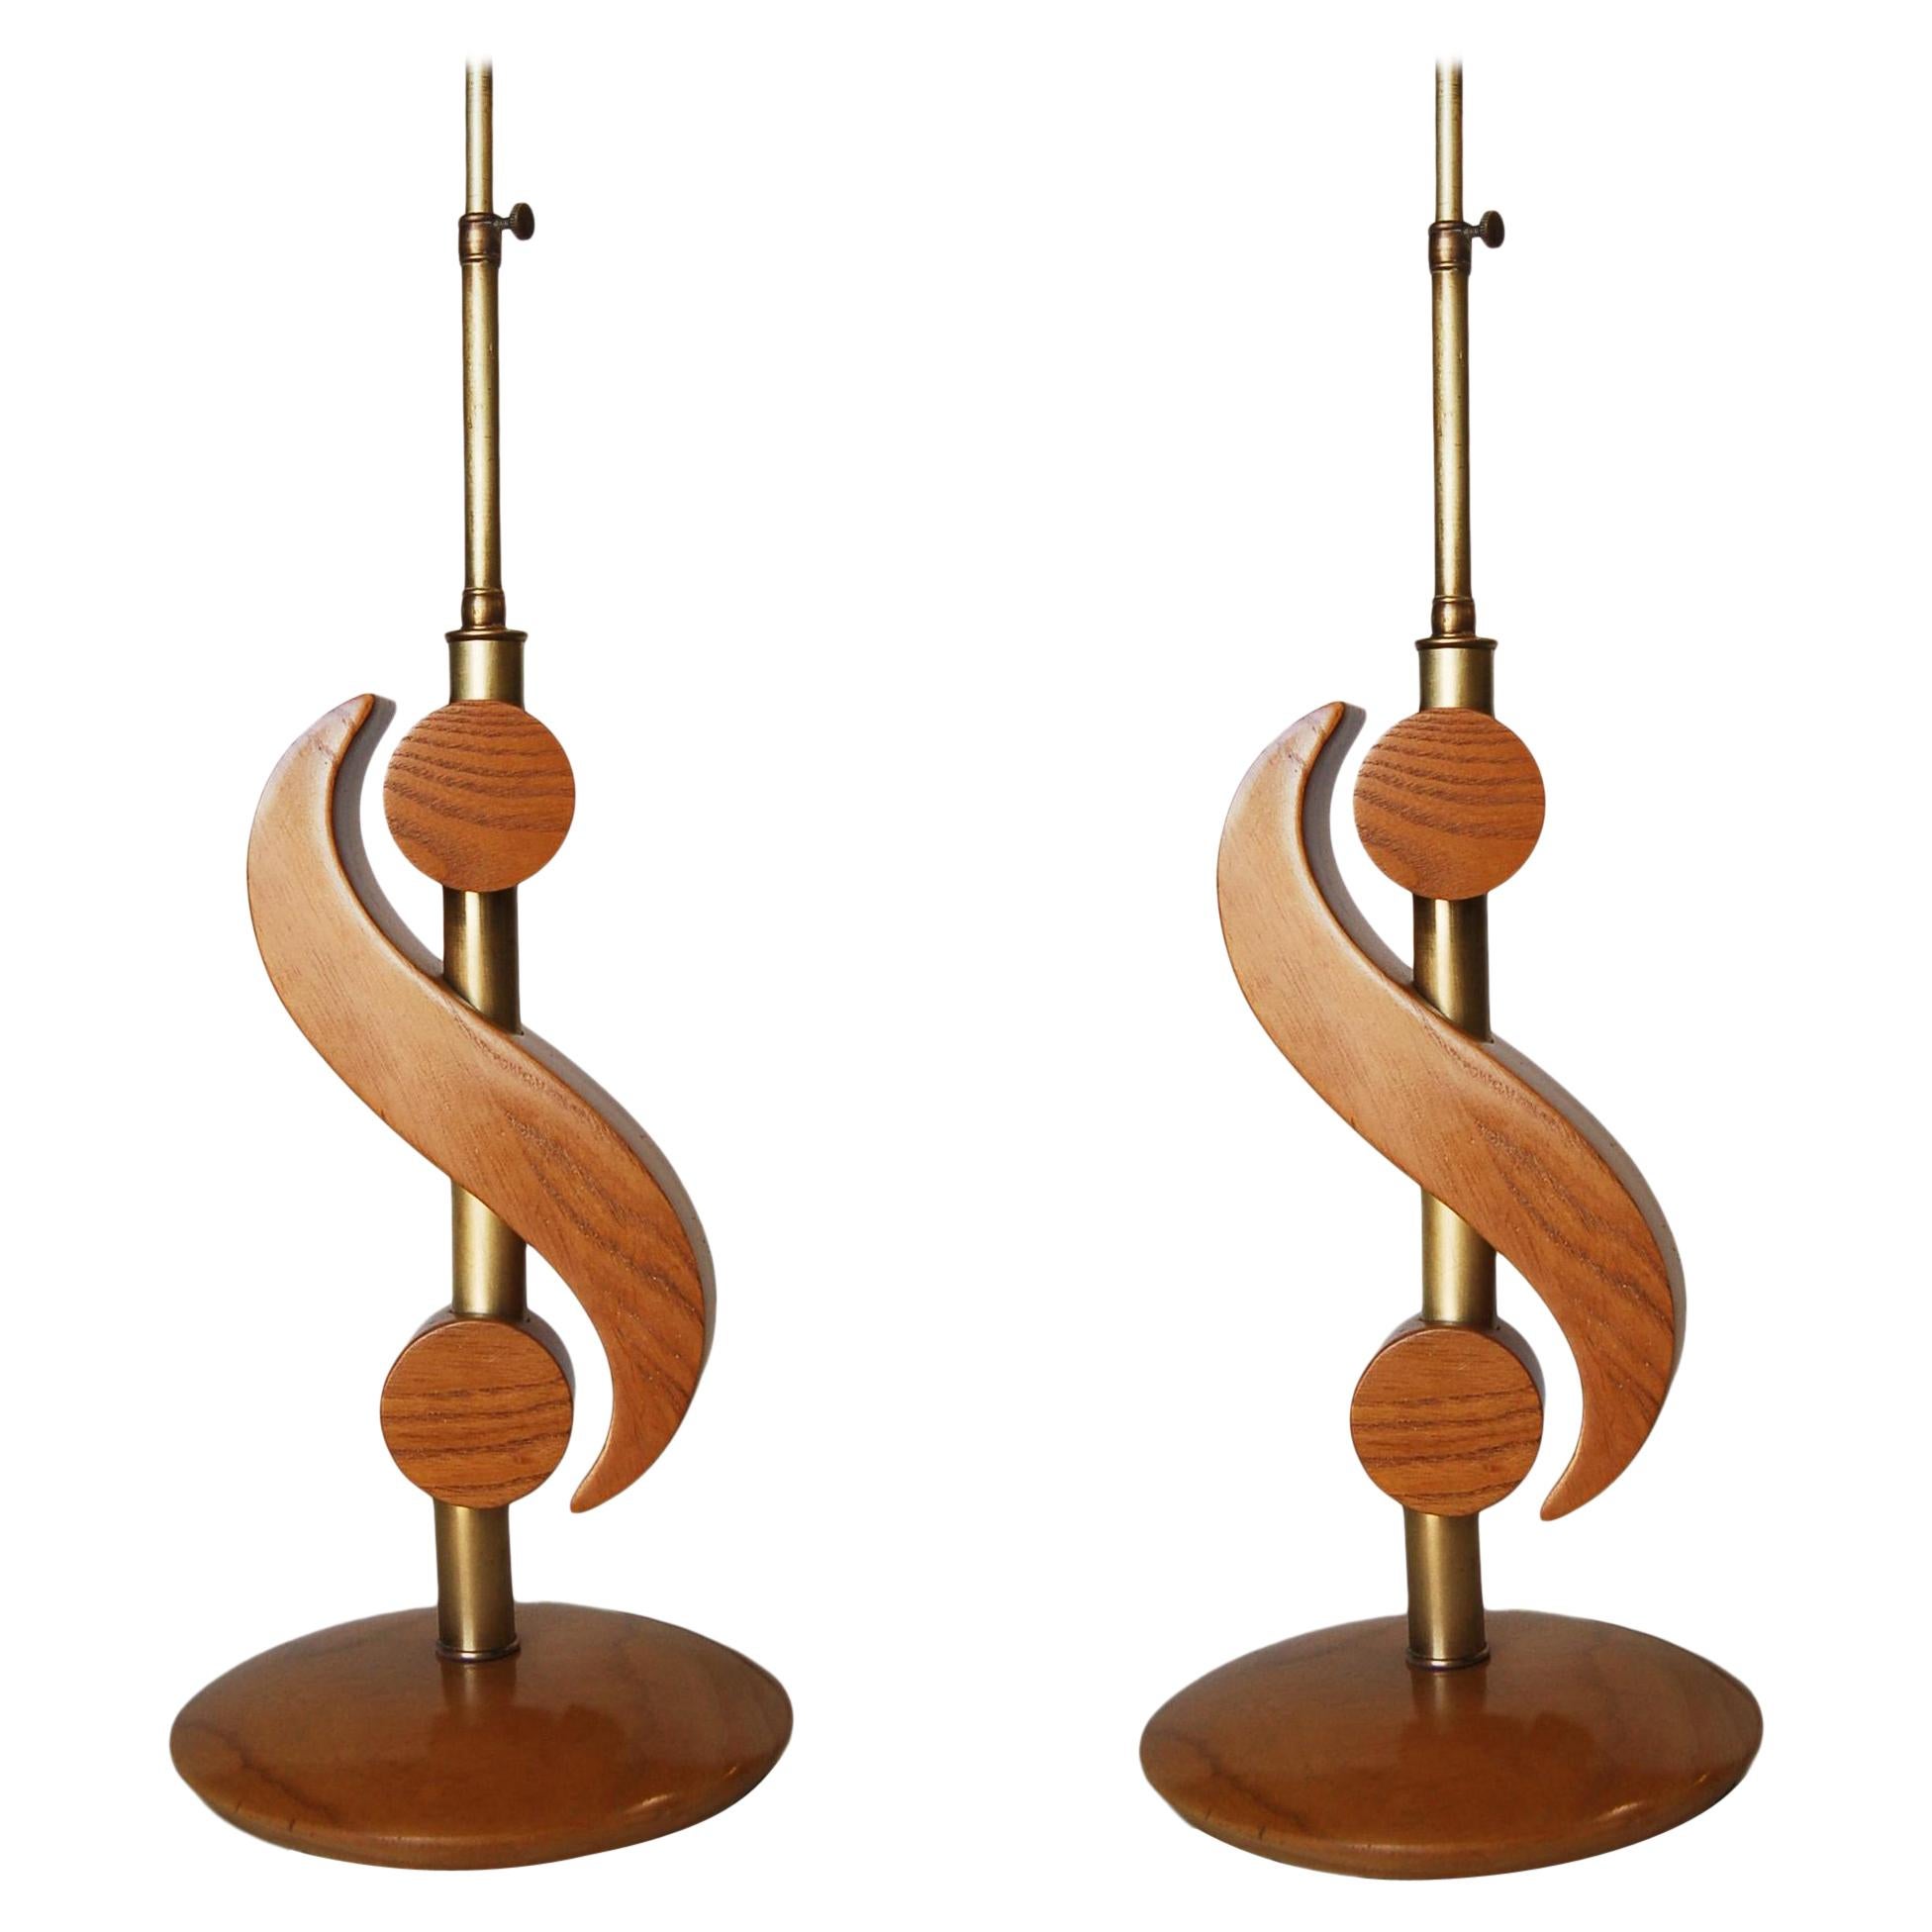 Carved Oak and Brass Biomorphic Modernist Table Lamp, Pair For Sale